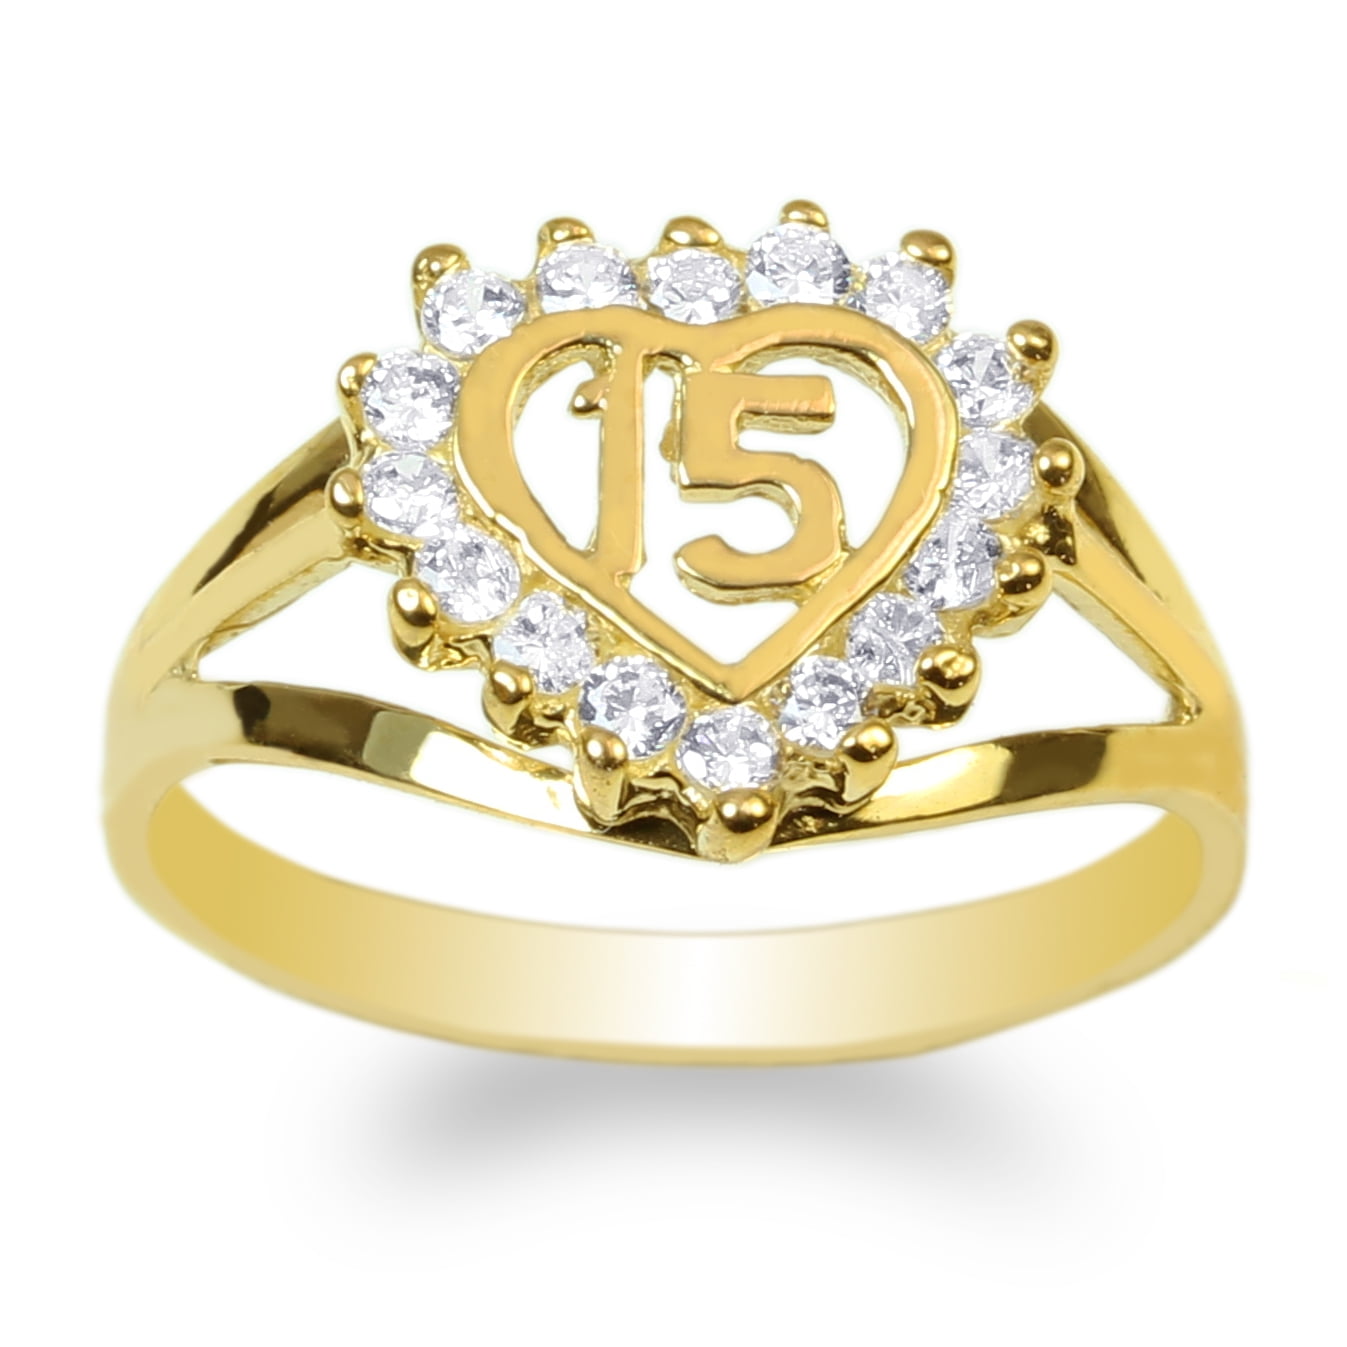 JamesJenny 10K Yellow Gold Heart Shaped 15 Anos Quinceanera Ring Size 4-10